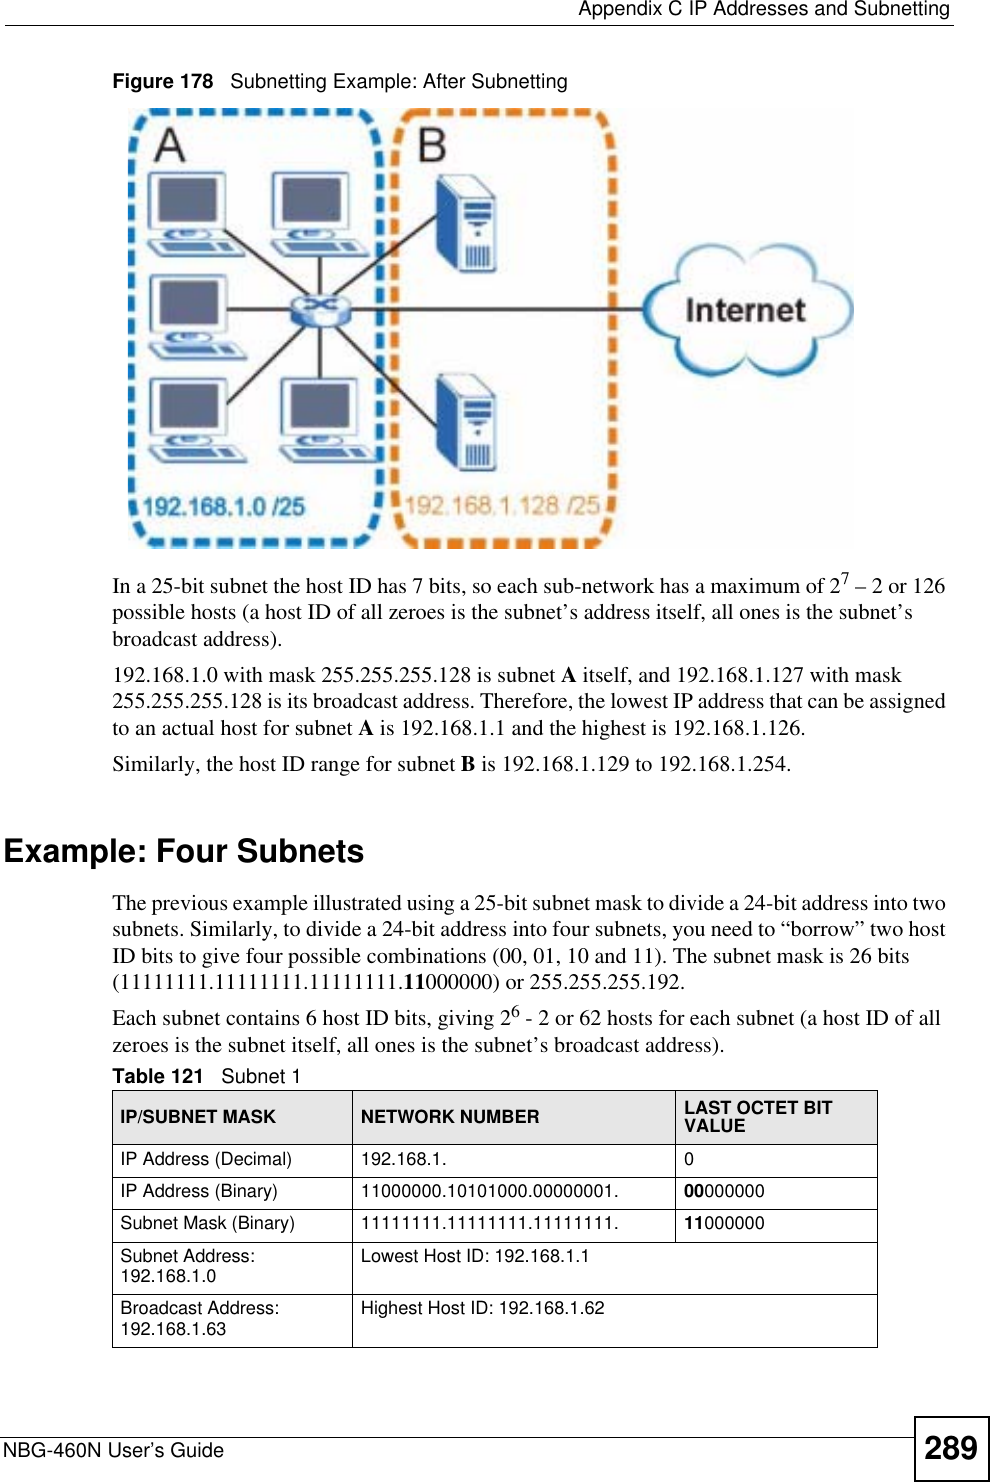  Appendix C IP Addresses and SubnettingNBG-460N User’s Guide 289Figure 178   Subnetting Example: After SubnettingIn a 25-bit subnet the host ID has 7 bits, so each sub-network has a maximum of 27 – 2 or 126 possible hosts (a host ID of all zeroes is the subnet’s address itself, all ones is the subnet’s broadcast address).192.168.1.0 with mask 255.255.255.128 is subnet A itself, and 192.168.1.127 with mask 255.255.255.128 is its broadcast address. Therefore, the lowest IP address that can be assigned to an actual host for subnet A is 192.168.1.1 and the highest is 192.168.1.126. Similarly, the host ID range for subnet B is 192.168.1.129 to 192.168.1.254.Example: Four Subnets The previous example illustrated using a 25-bit subnet mask to divide a 24-bit address into two subnets. Similarly, to divide a 24-bit address into four subnets, you need to “borrow” two host ID bits to give four possible combinations (00, 01, 10 and 11). The subnet mask is 26 bits (11111111.11111111.11111111.11000000) or 255.255.255.192. Each subnet contains 6 host ID bits, giving 26 - 2 or 62 hosts for each subnet (a host ID of all zeroes is the subnet itself, all ones is the subnet’s broadcast address). Table 121   Subnet 1IP/SUBNET MASK NETWORK NUMBER LAST OCTET BIT VALUEIP Address (Decimal) 192.168.1. 0IP Address (Binary) 11000000.10101000.00000001. 00000000Subnet Mask (Binary) 11111111.11111111.11111111. 11000000Subnet Address: 192.168.1.0 Lowest Host ID: 192.168.1.1Broadcast Address: 192.168.1.63 Highest Host ID: 192.168.1.62